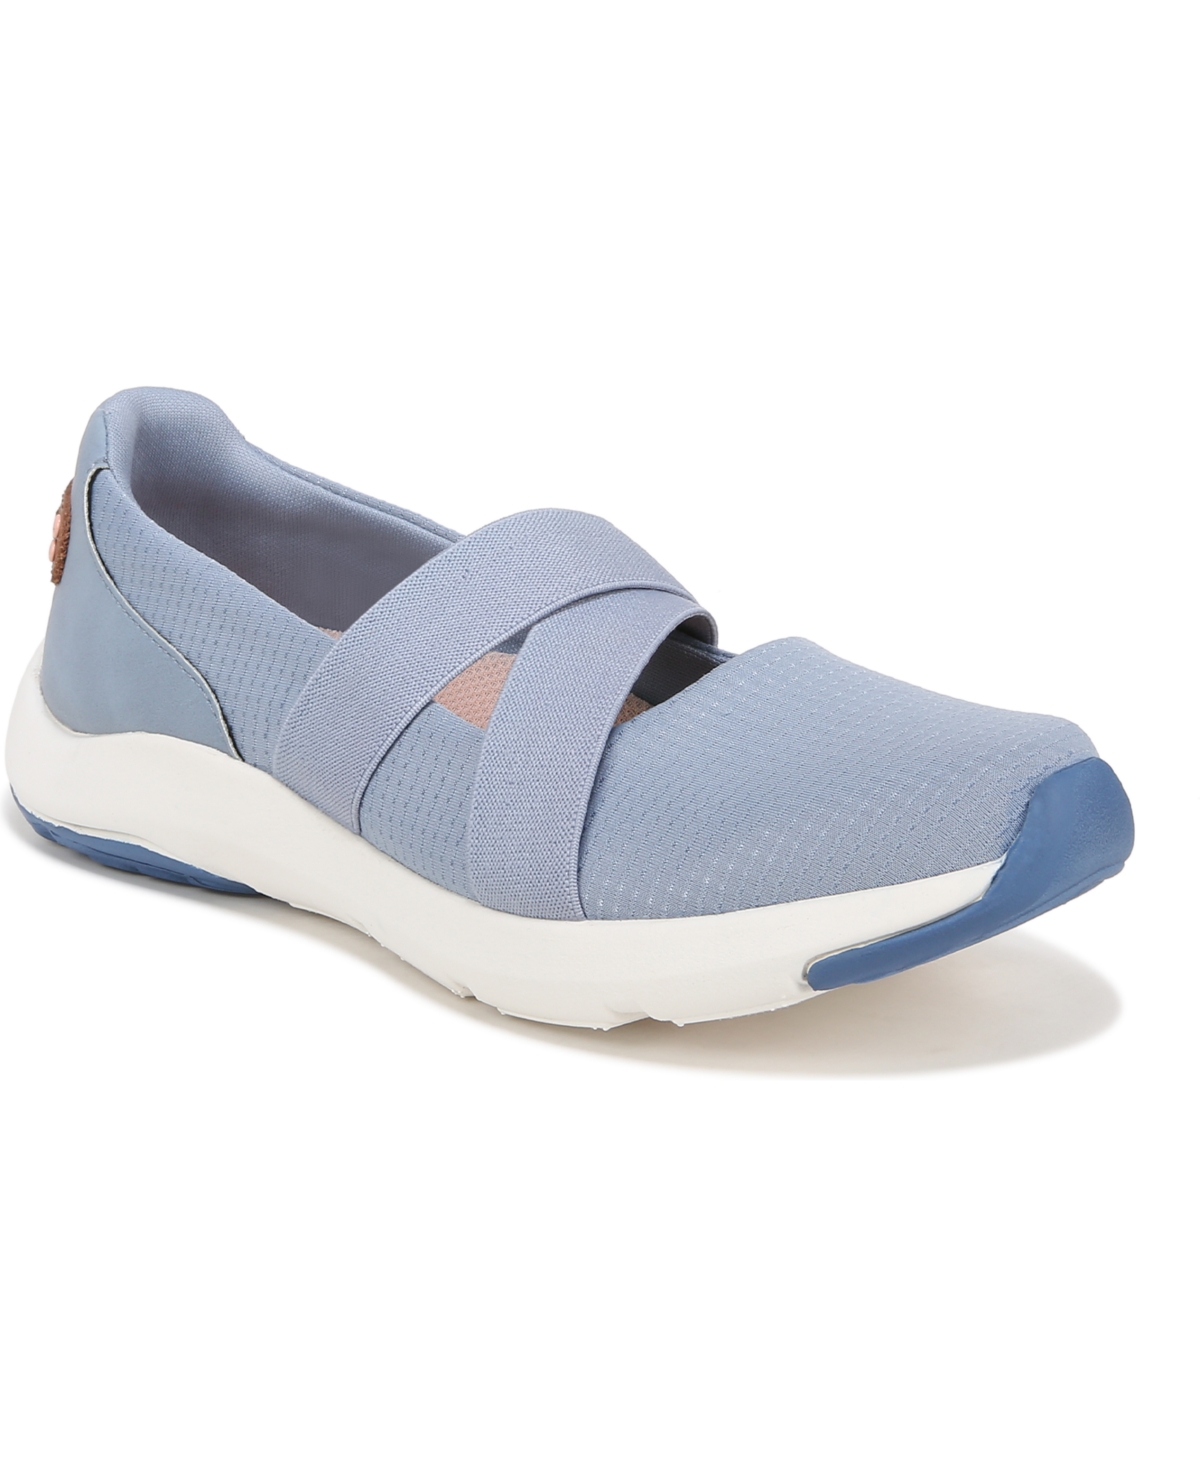 Women's Endless Mary Janes - Dusty Blue Fabric